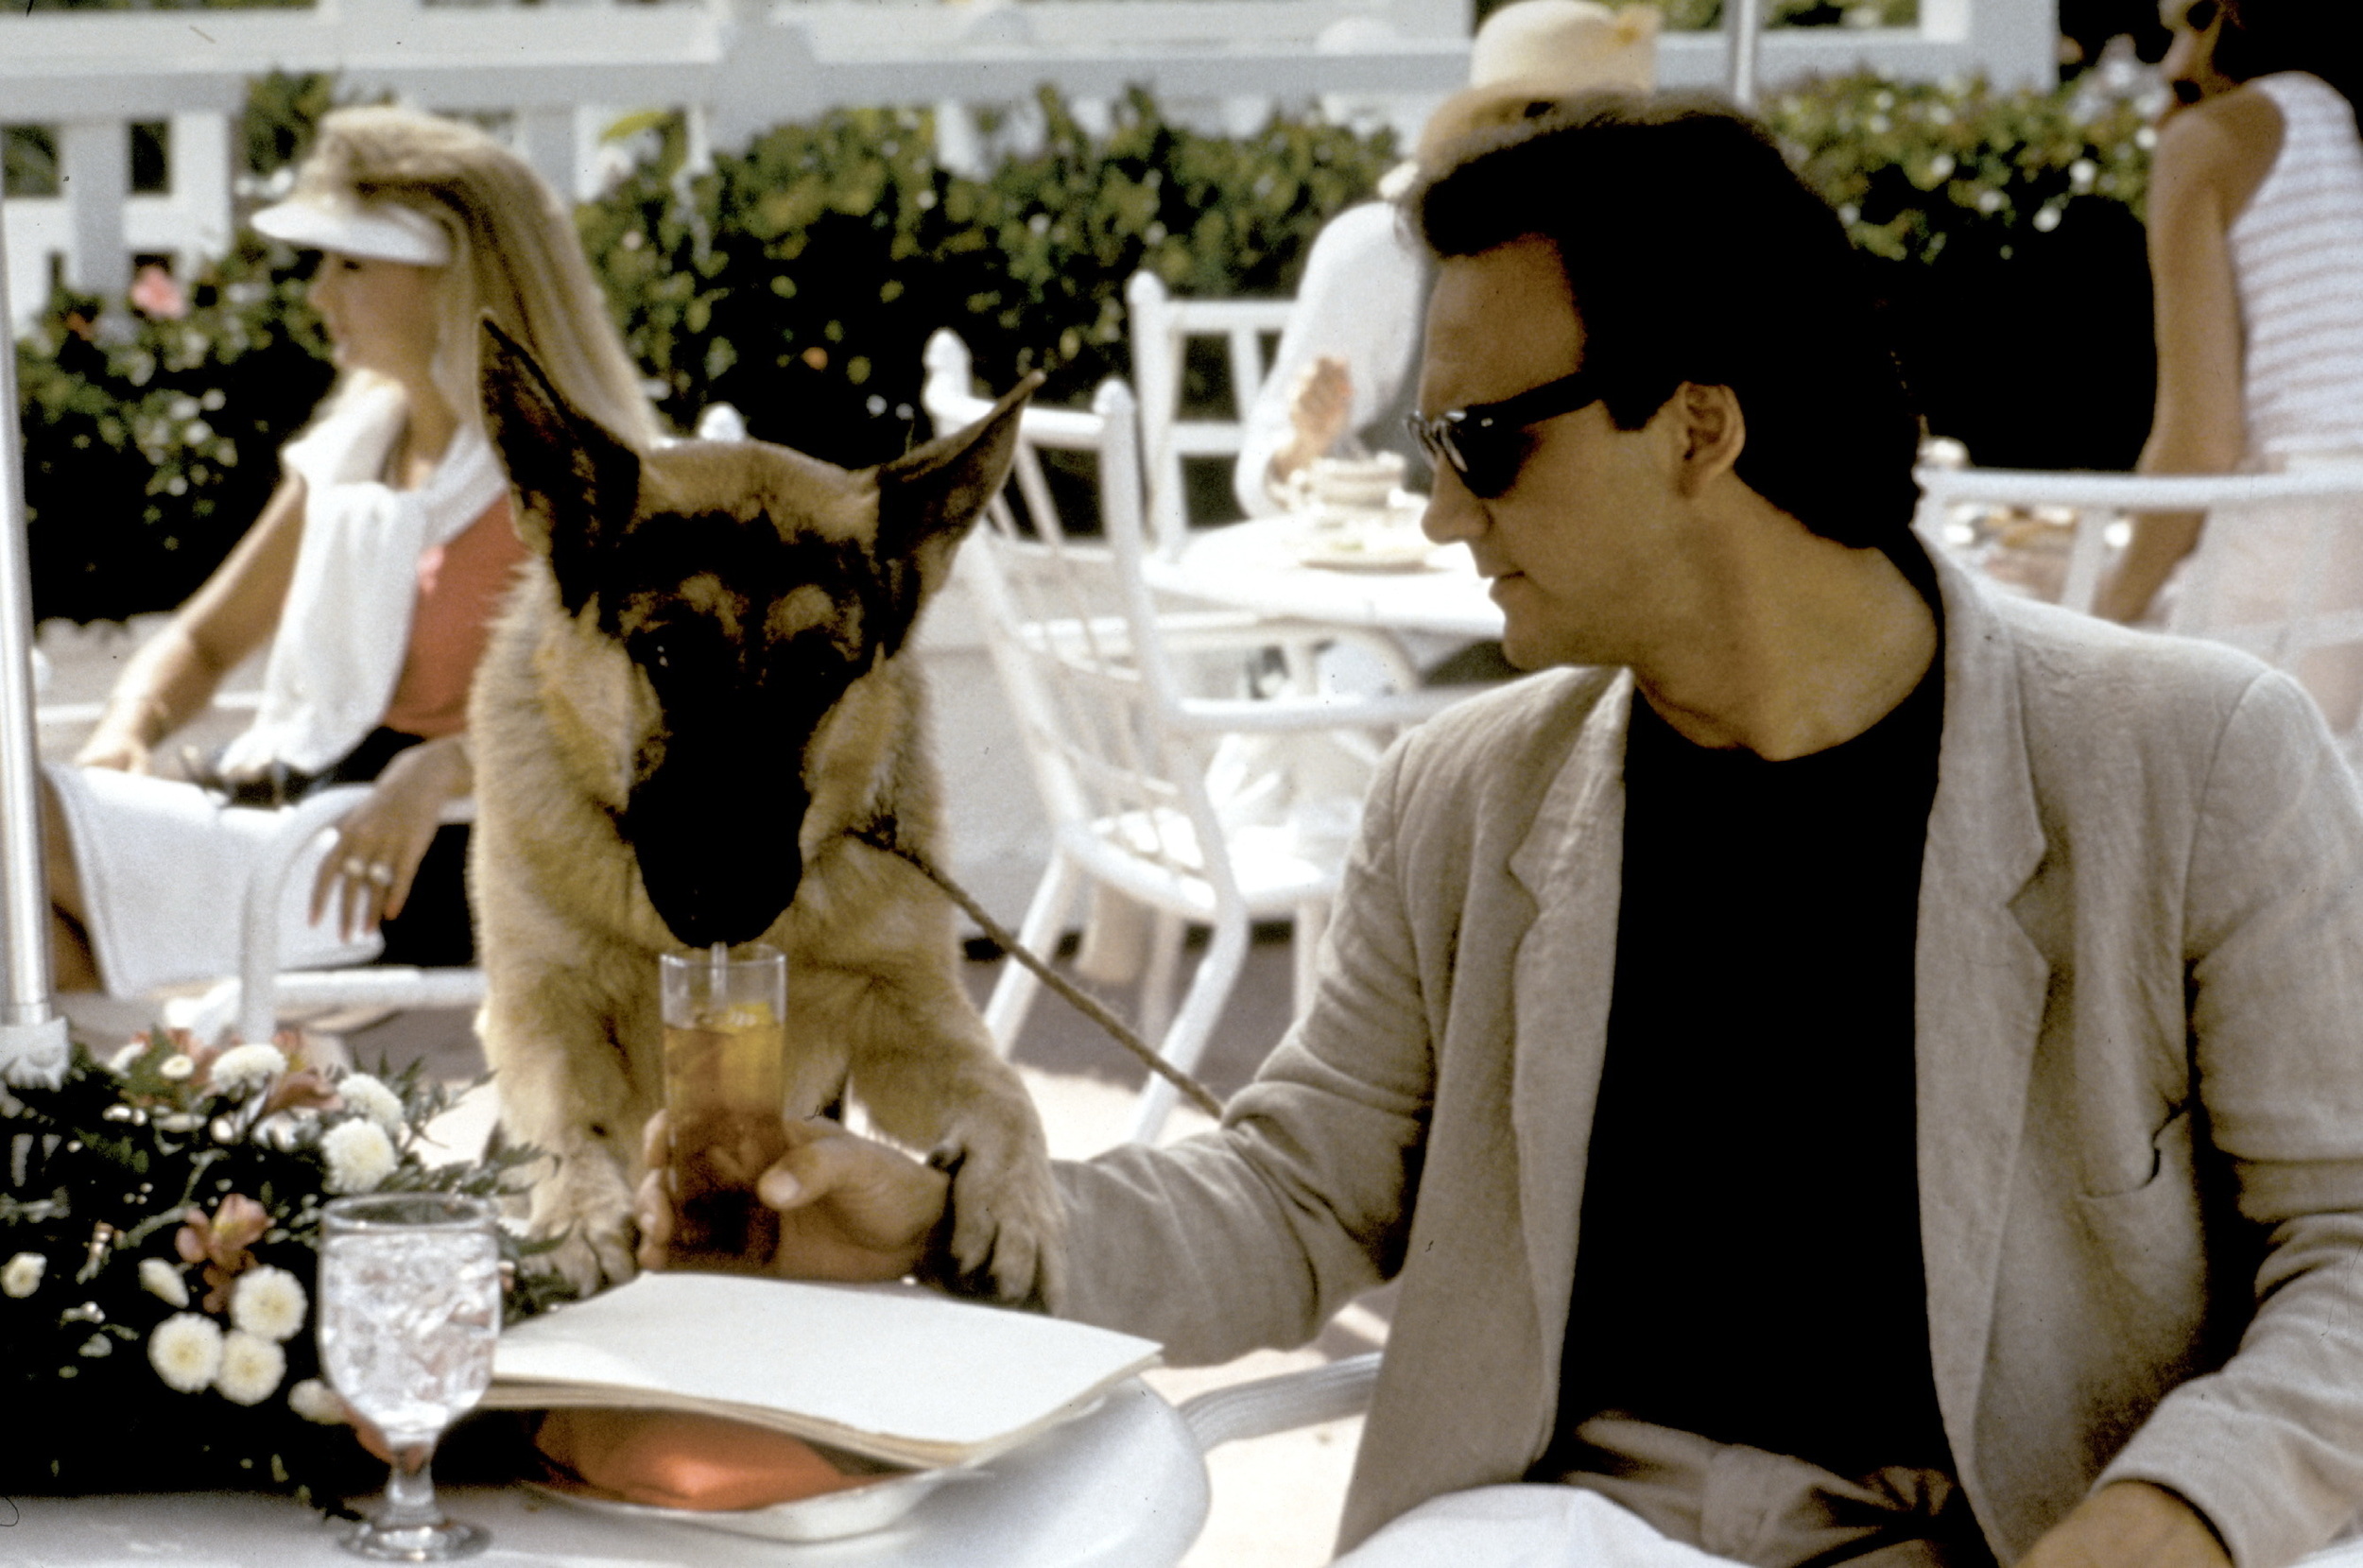 <p>Apparently 1989 was big for dogs and cops joining forces. This time, it’s Jim Belushi in the role of the cop, and his dog partner is a German shepherd, a more-traditional choice than Hooch. The movie isn’t quite on par with the Tom Hanks vehicle of the same year, but it found success anyway.</p><p><a href='https://www.msn.com/en-us/community/channel/vid-cj9pqbr0vn9in2b6ddcd8sfgpfq6x6utp44fssrv6mc2gtybw0us'>Follow us on MSN to see more of our exclusive entertainment content.</a></p>